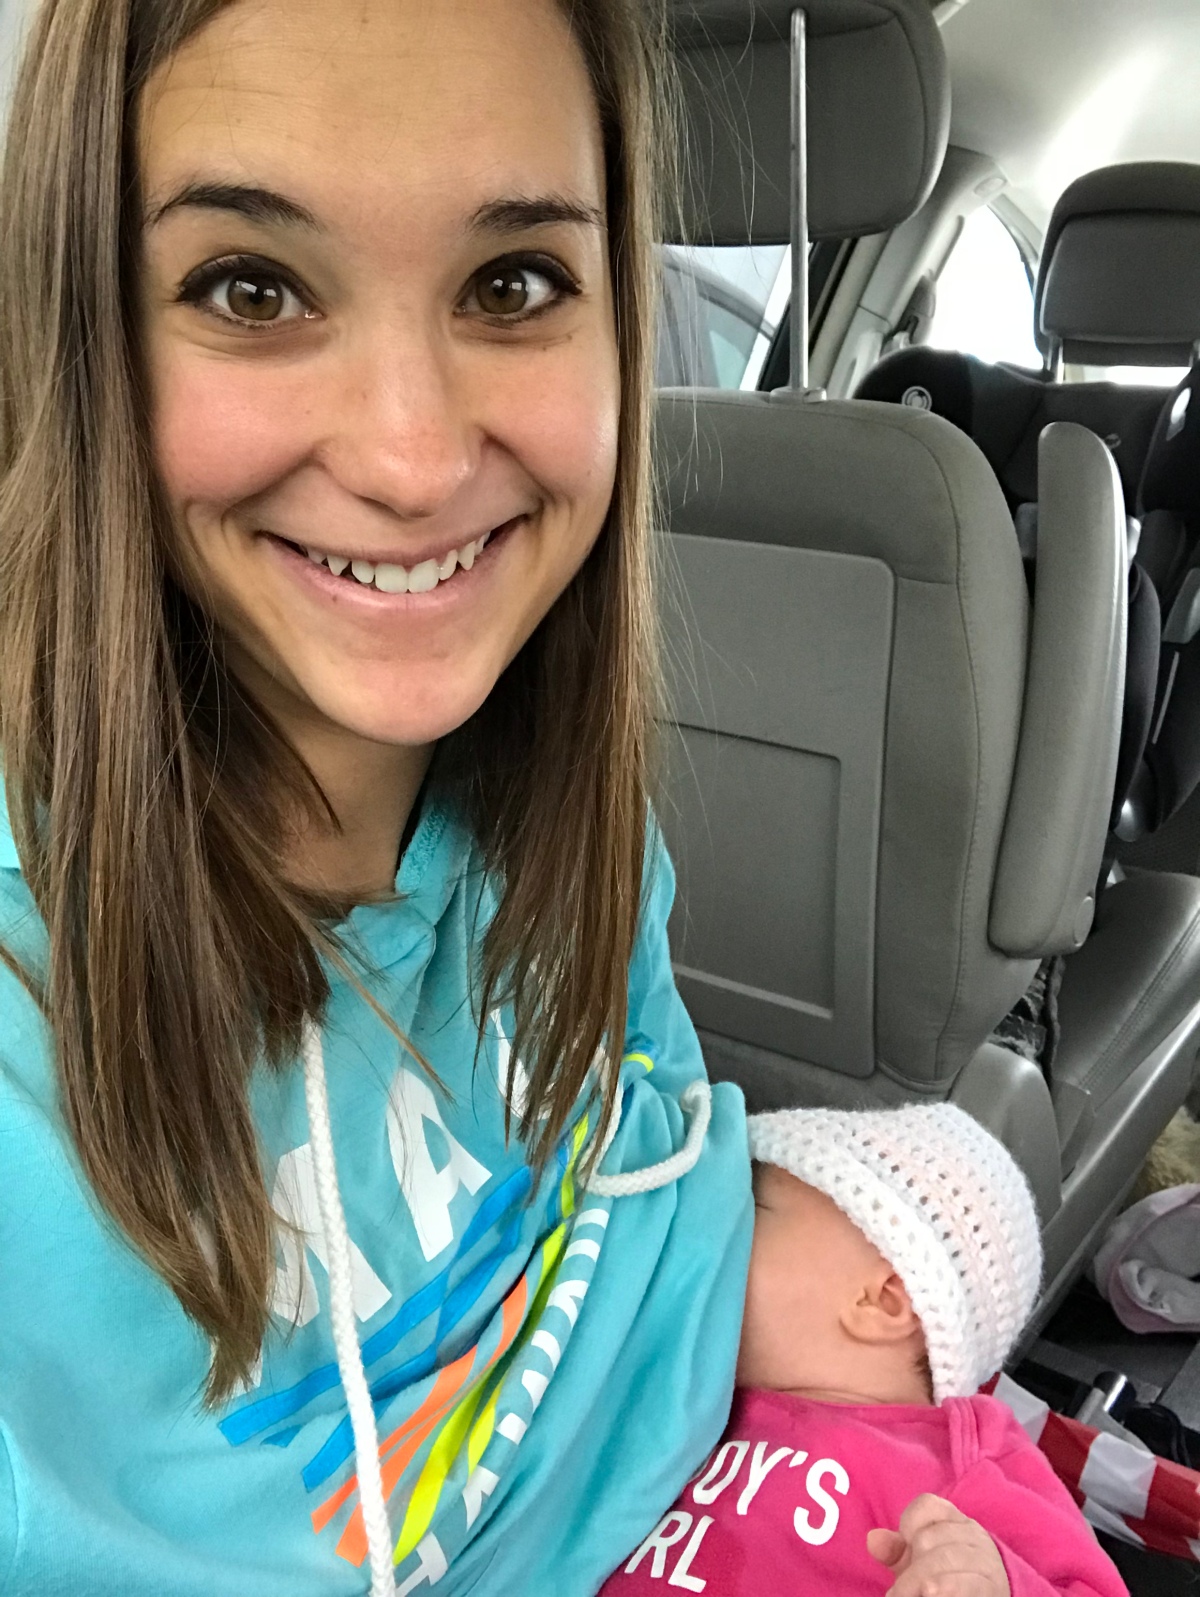 Breastfeeding in a minivan is all too common because breastfeeding in public is difficult, inconvenient, or shamed upon.